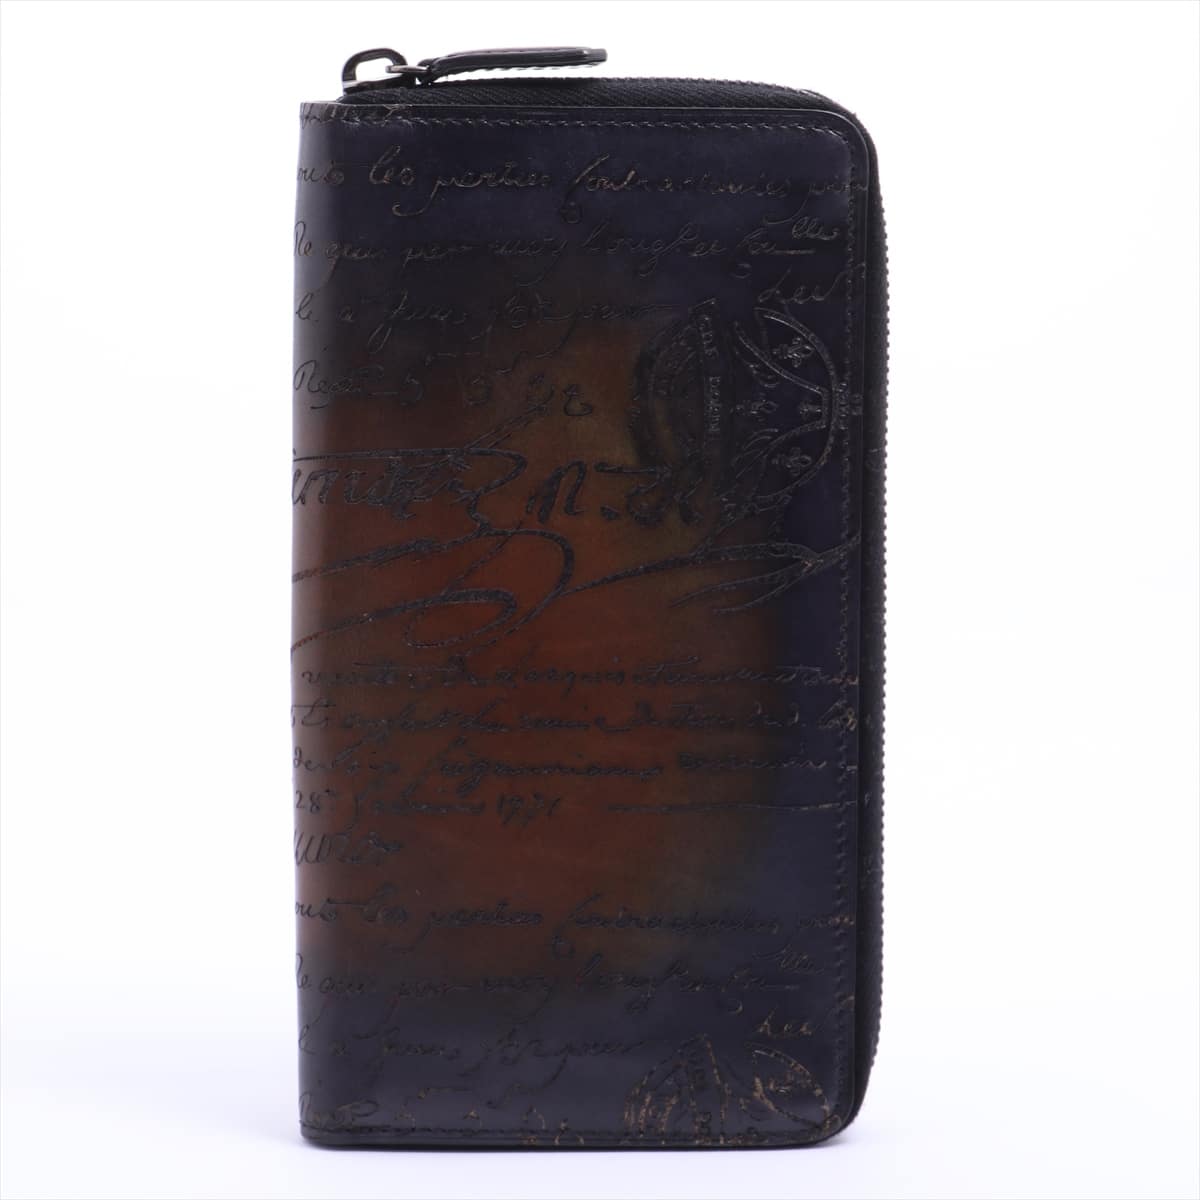 Berluti Calligraphy Leather Wallet Navy x brown